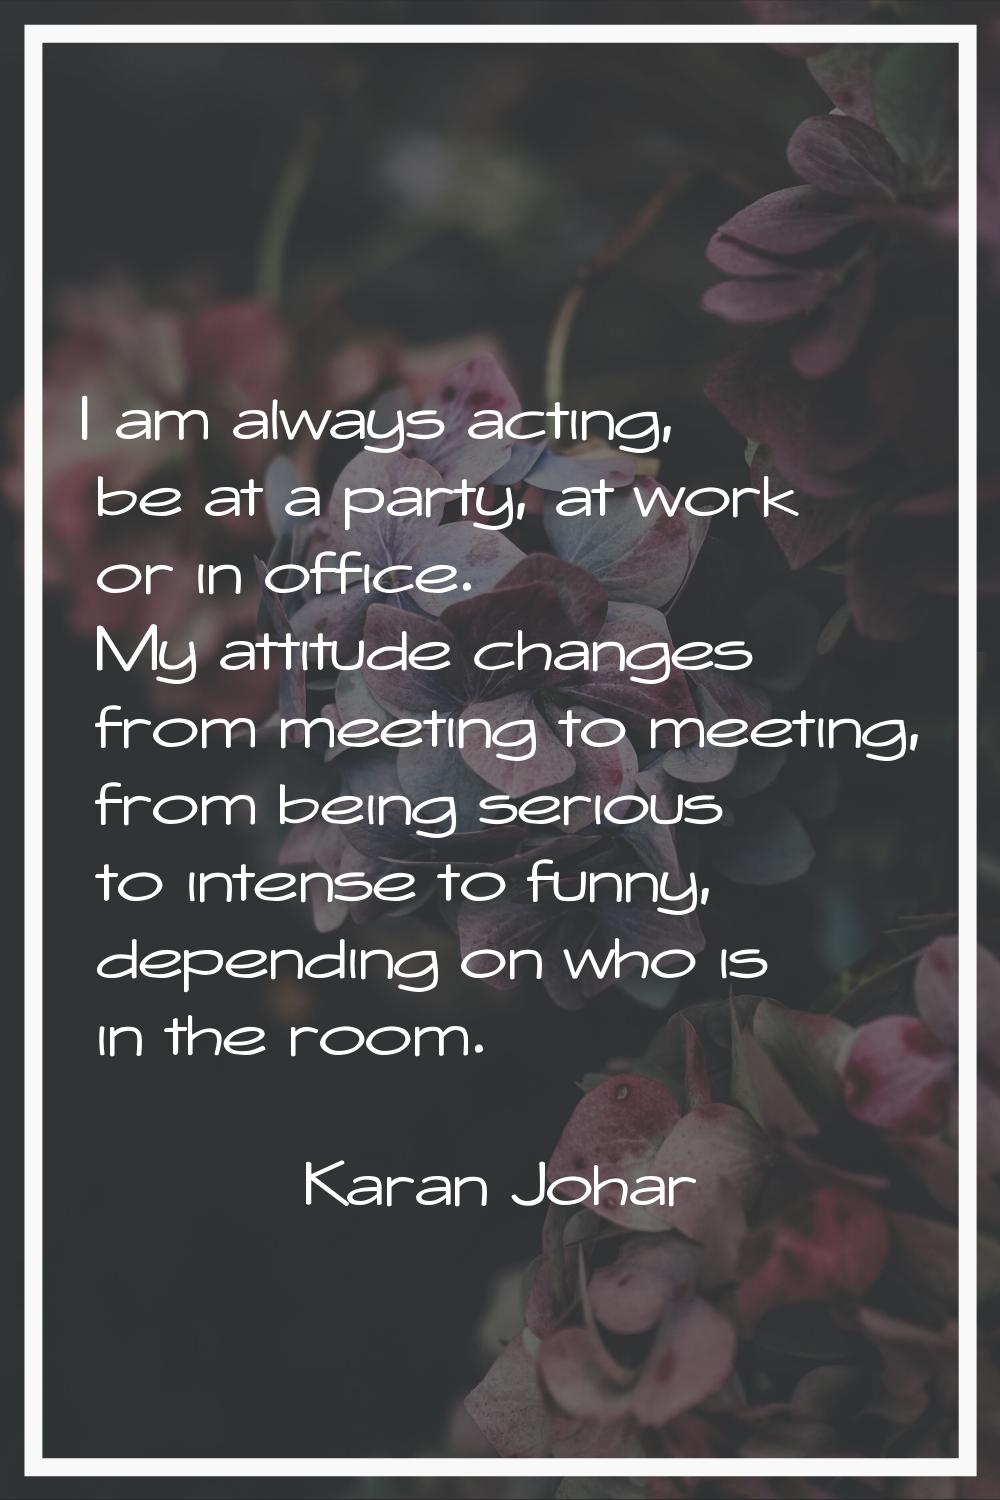 I am always acting, be at a party, at work or in office. My attitude changes from meeting to meetin